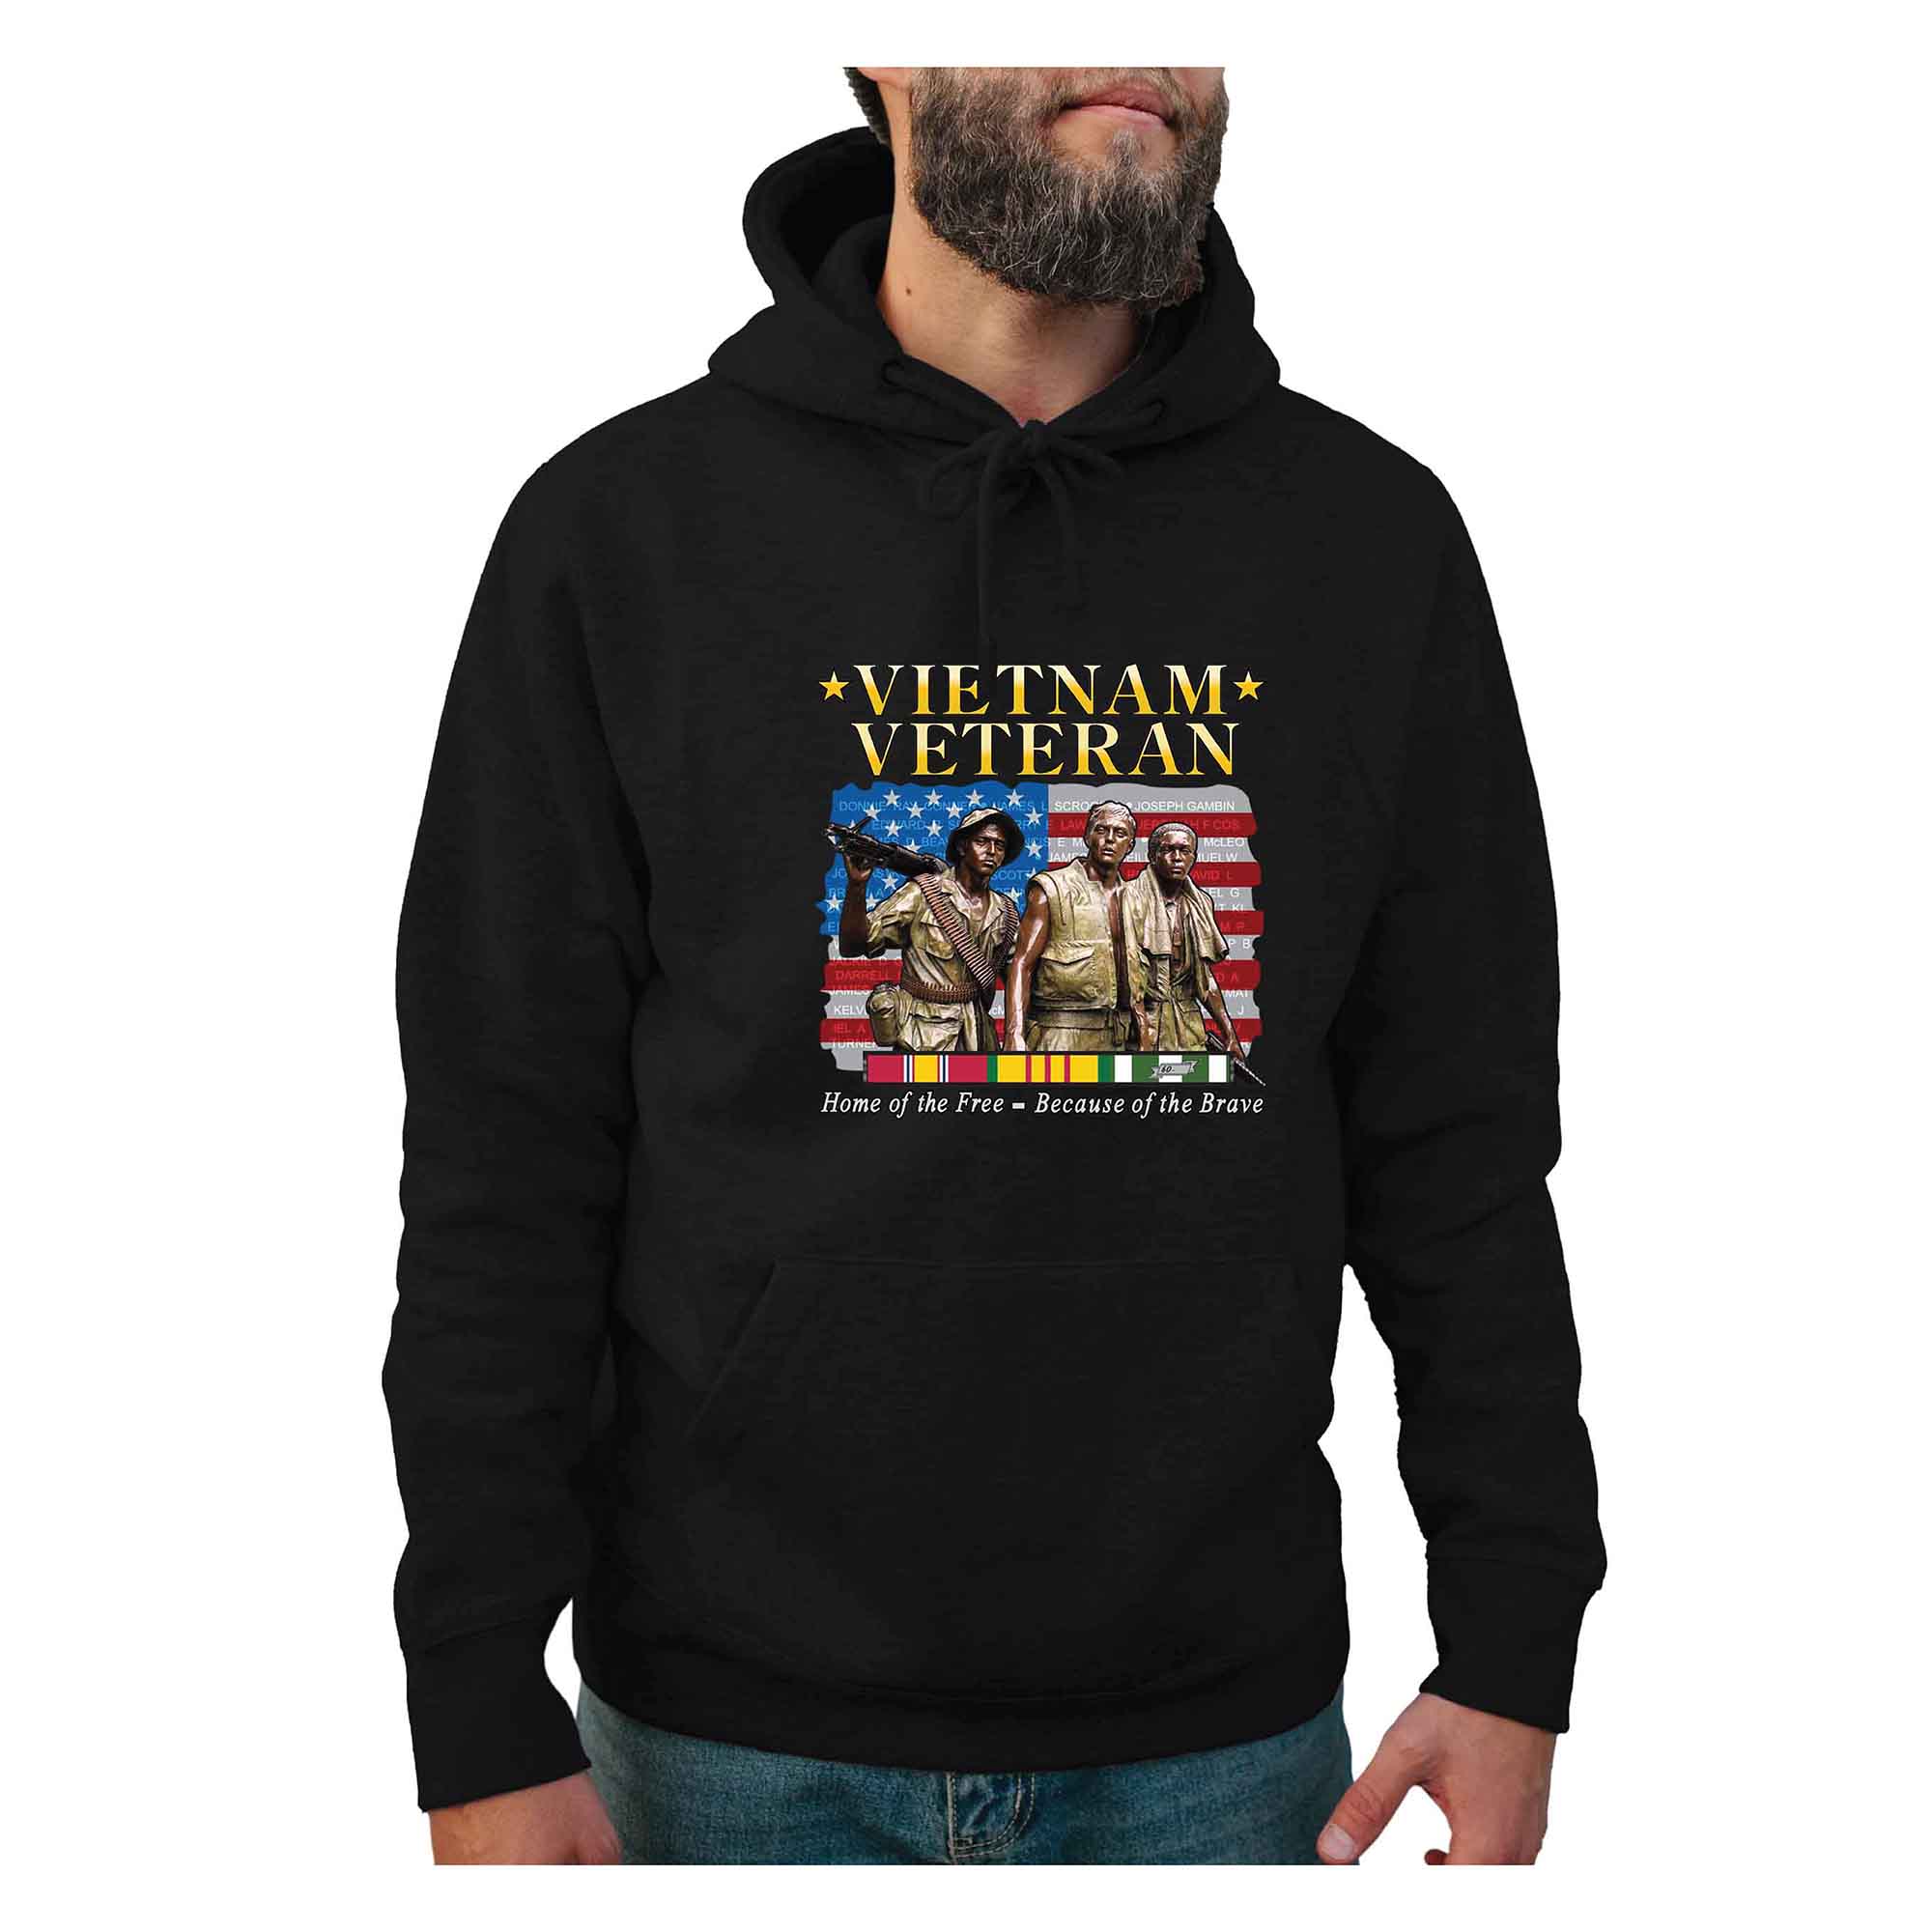 Vietnam Veteran - Home of the Free - Because of the Brave Hoodie